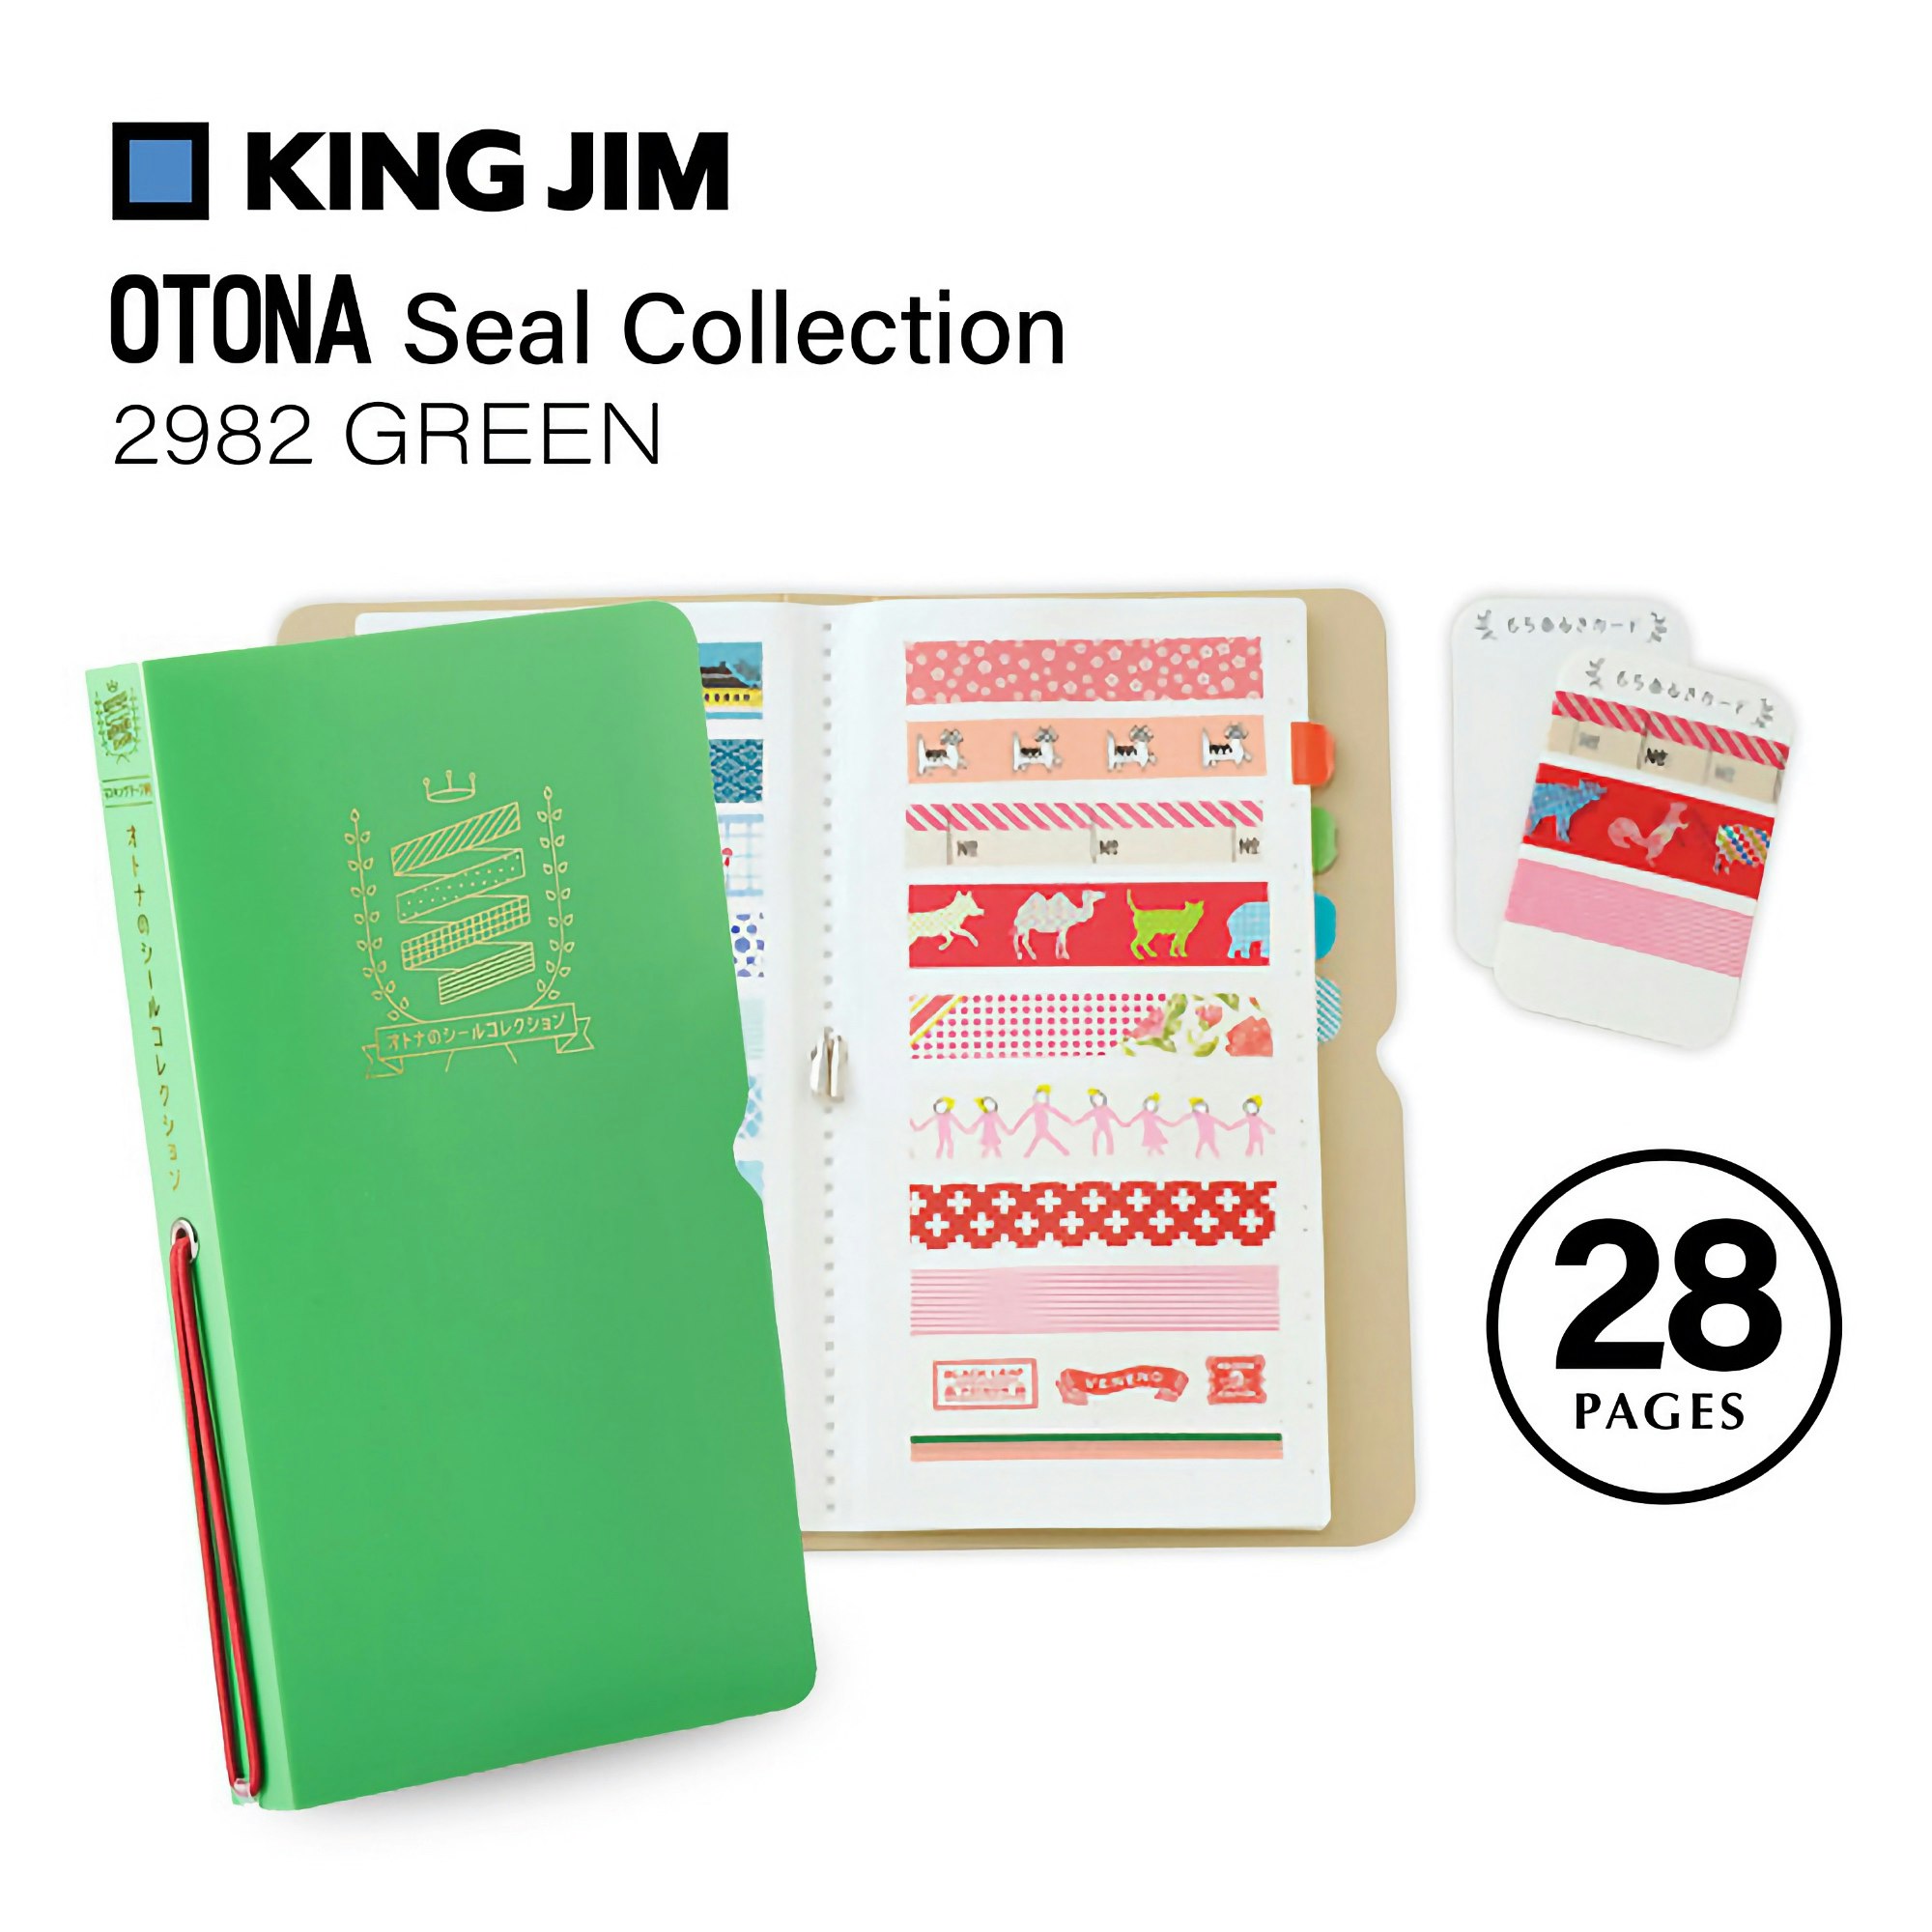 King Jim Otona Seal Sticker Collection Book Red